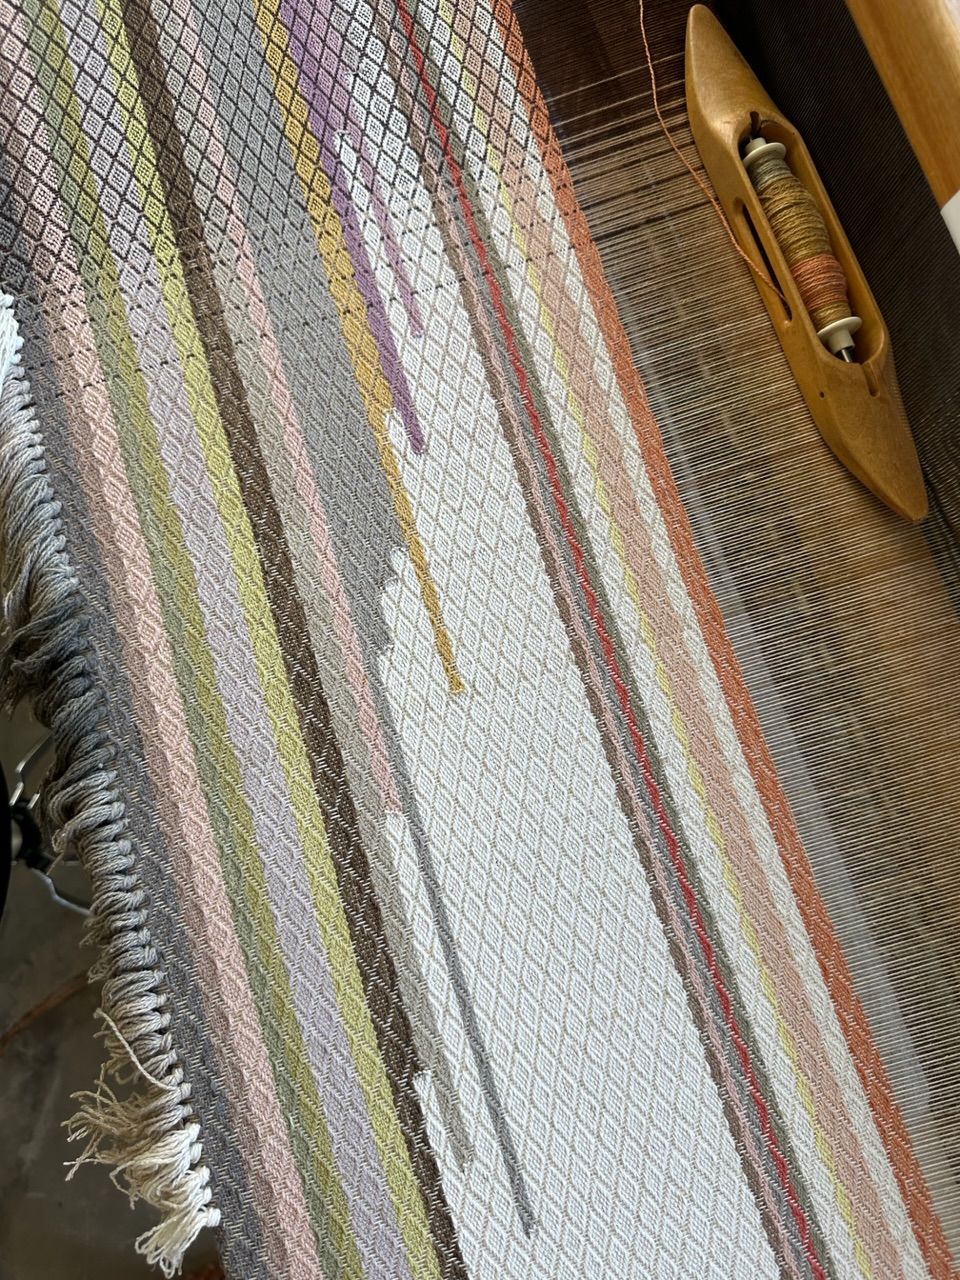 A detailed image of textured diamond pattern fabric on a loom, in soft naturally dyed shades of the rainbow.